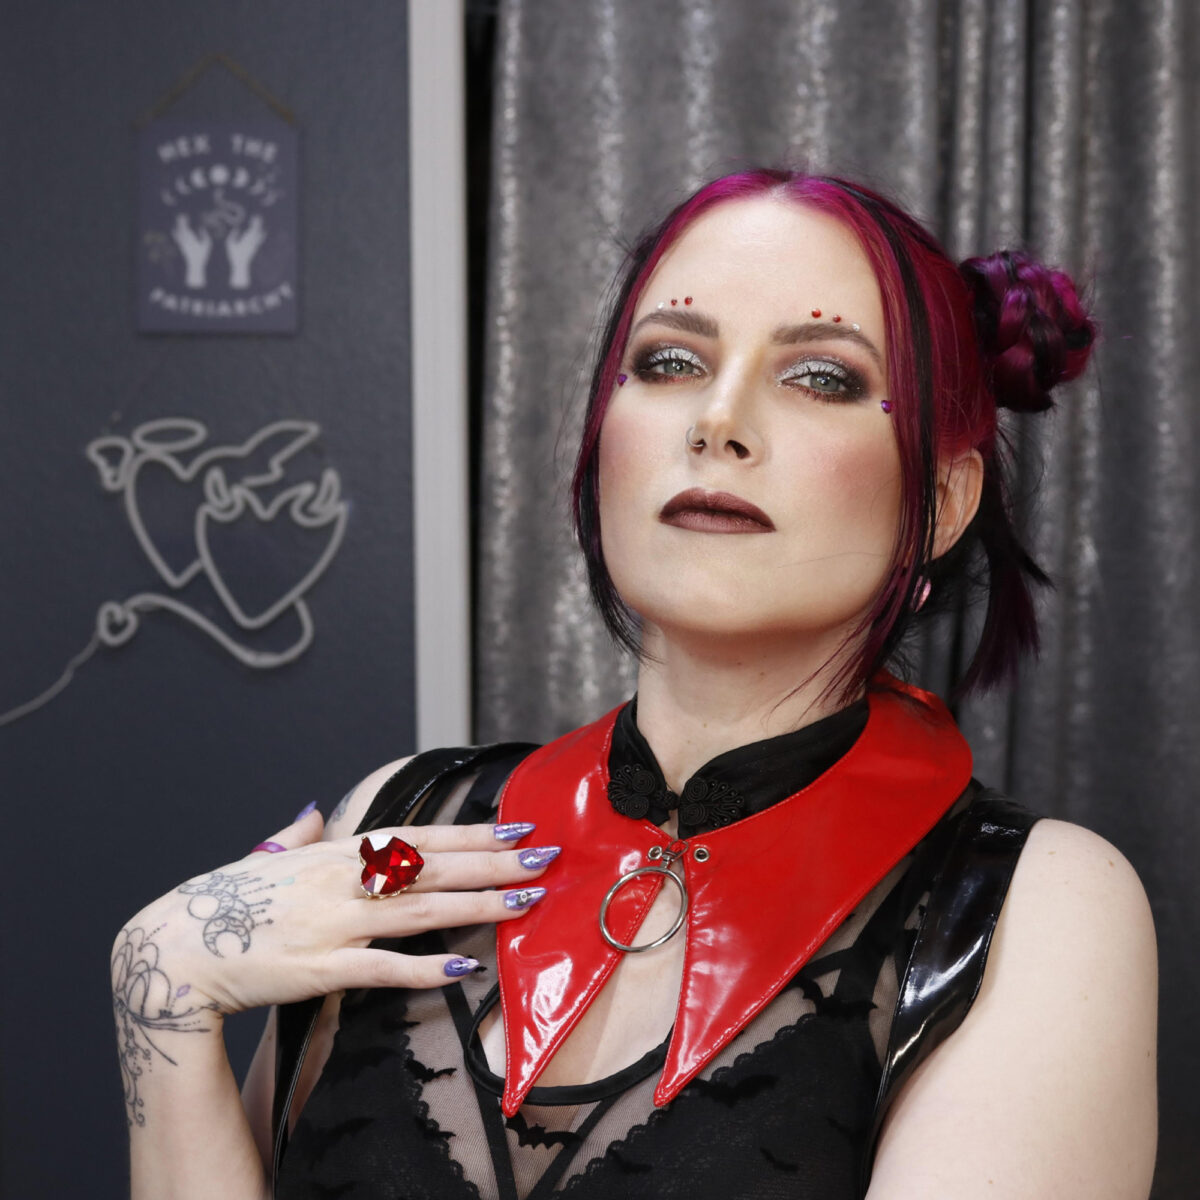 Red and Black gothic makeup and outfit